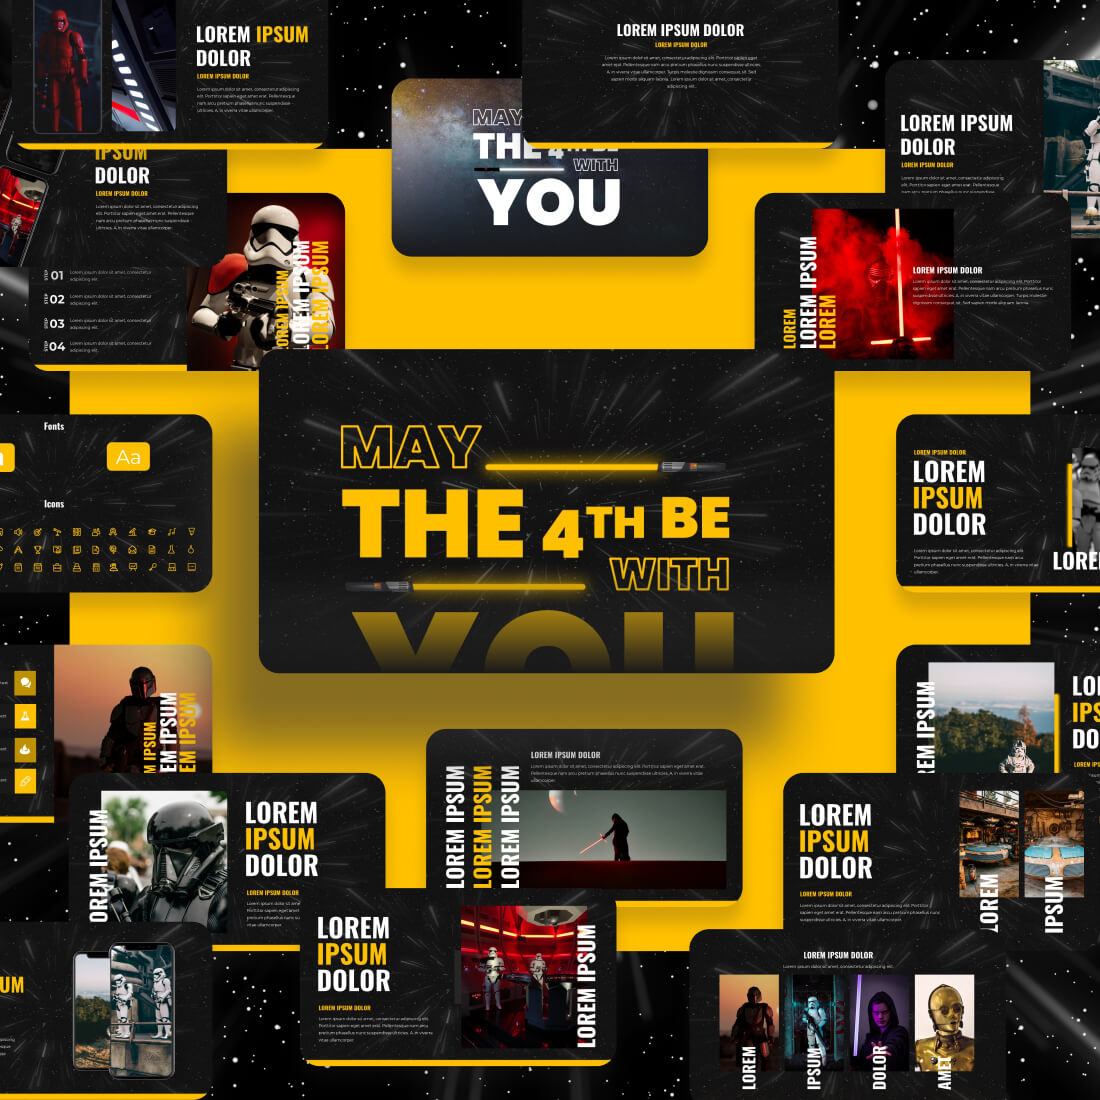 May4th Star Wars Powerpoint Template preview image.